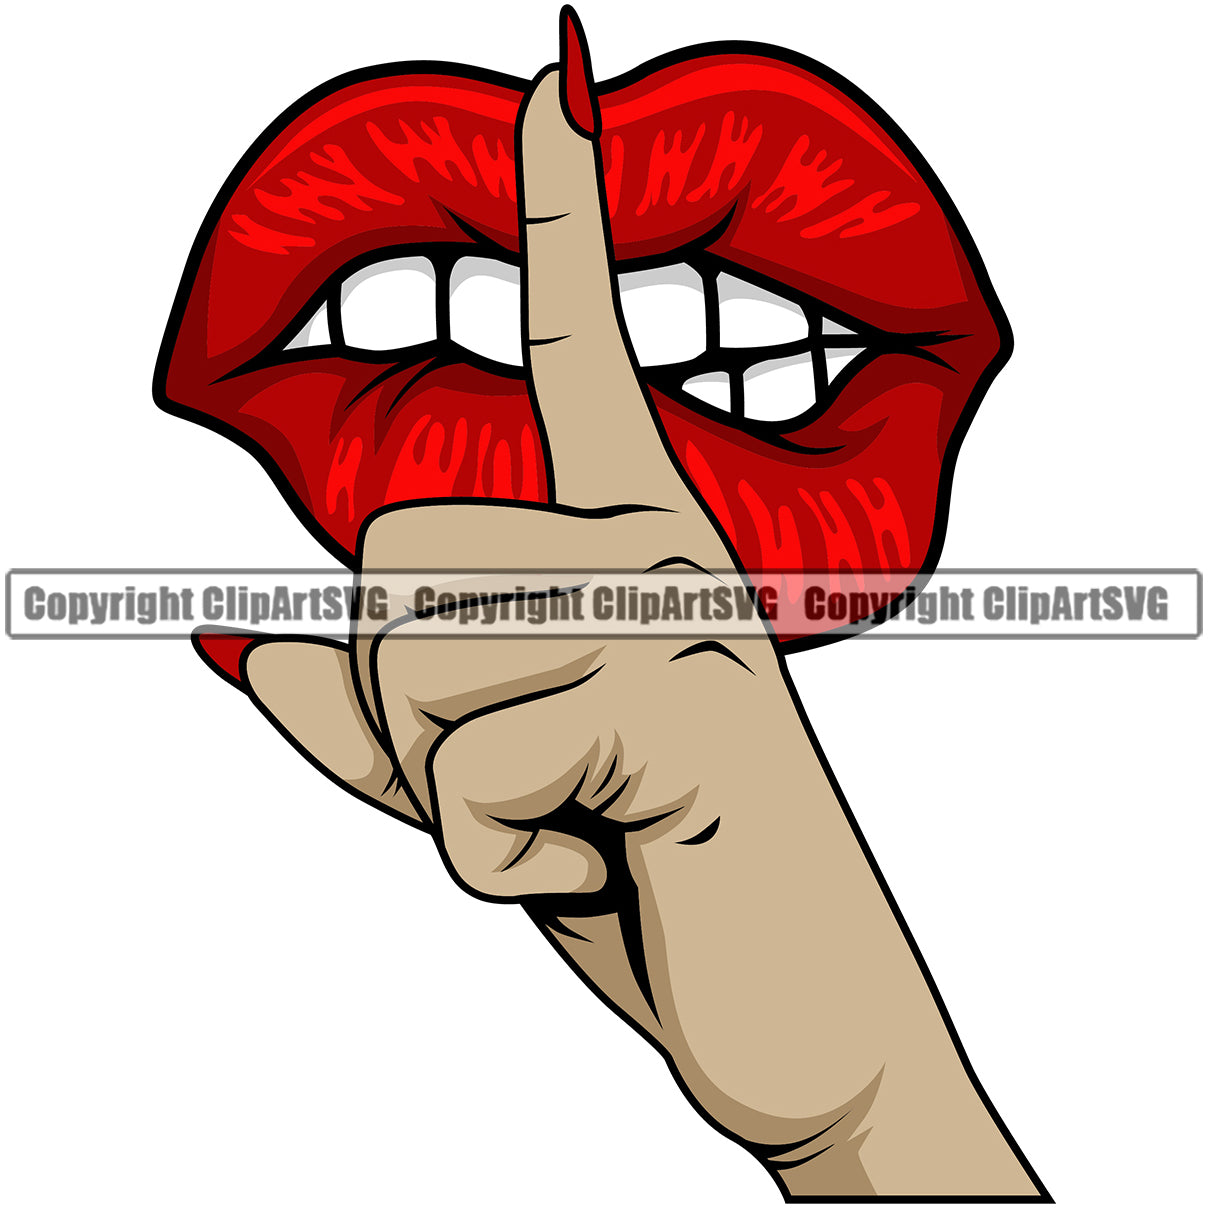 Lips Shh Shhh Finger Be Quite Shut Up Hand Gesture Sign Signal Symbol White Caucasian Design Element Woman Female Girl Lady Face Sexy Mouth Position Head Cartoon Character Mascot Creation Create Art Artwork Creator Business Company Logo Clipart SVG